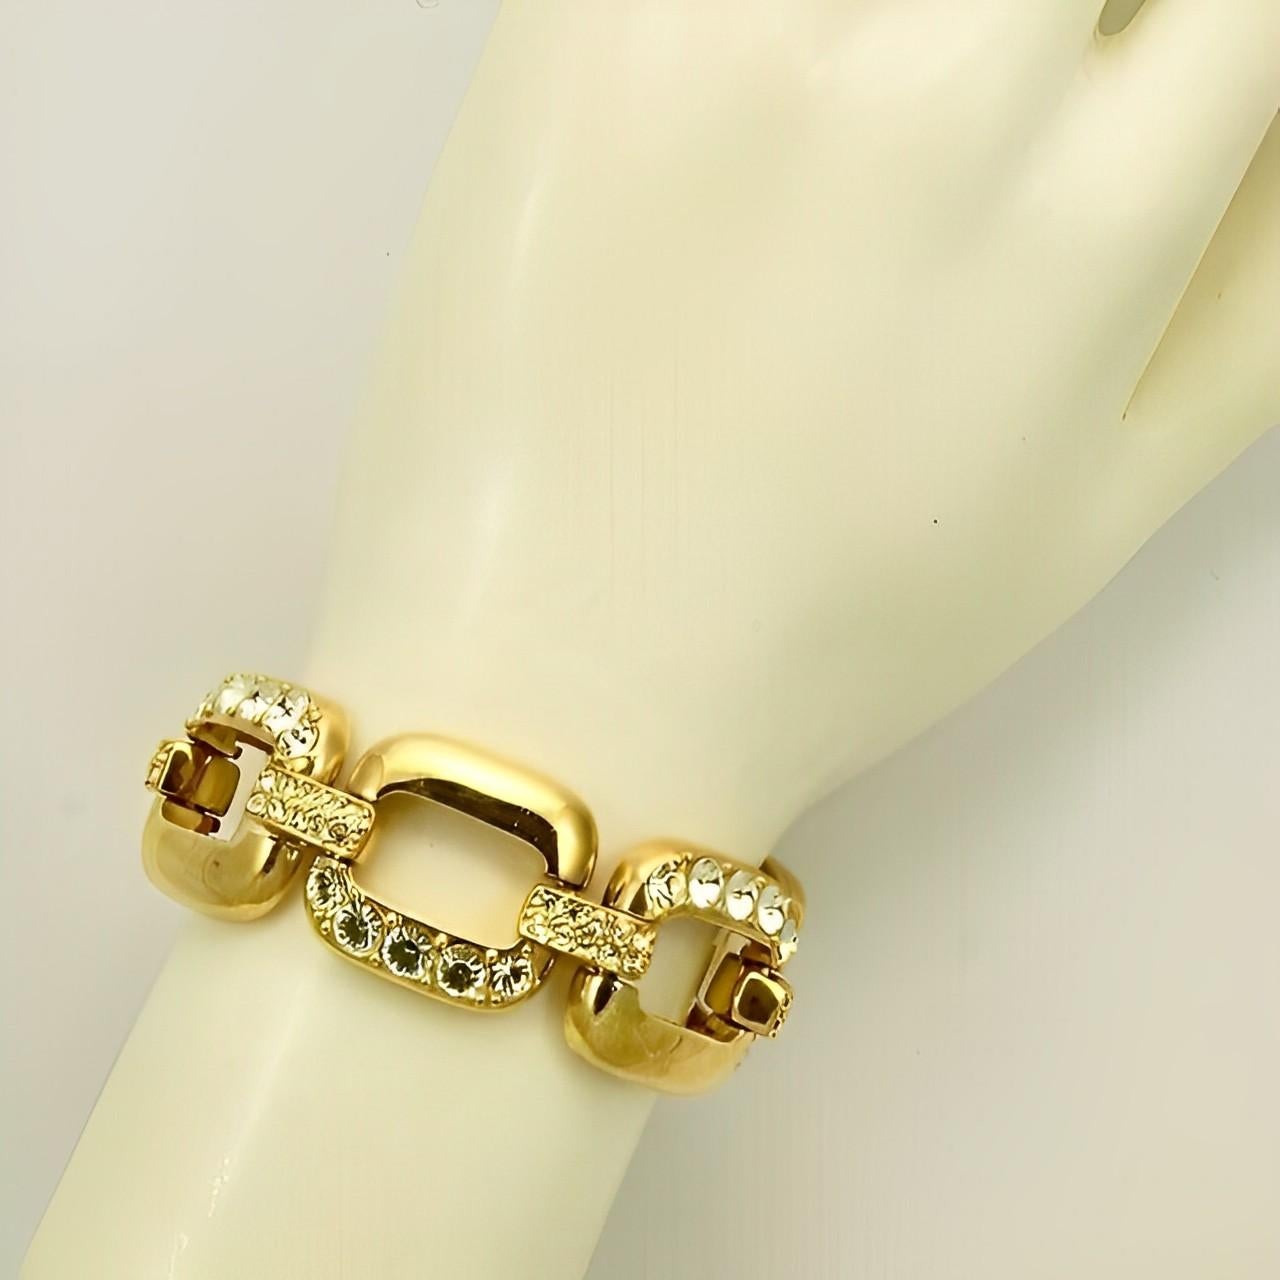 Gold Plated Wide Link Statement Bracelet with Crystals circa 1980s For Sale 1